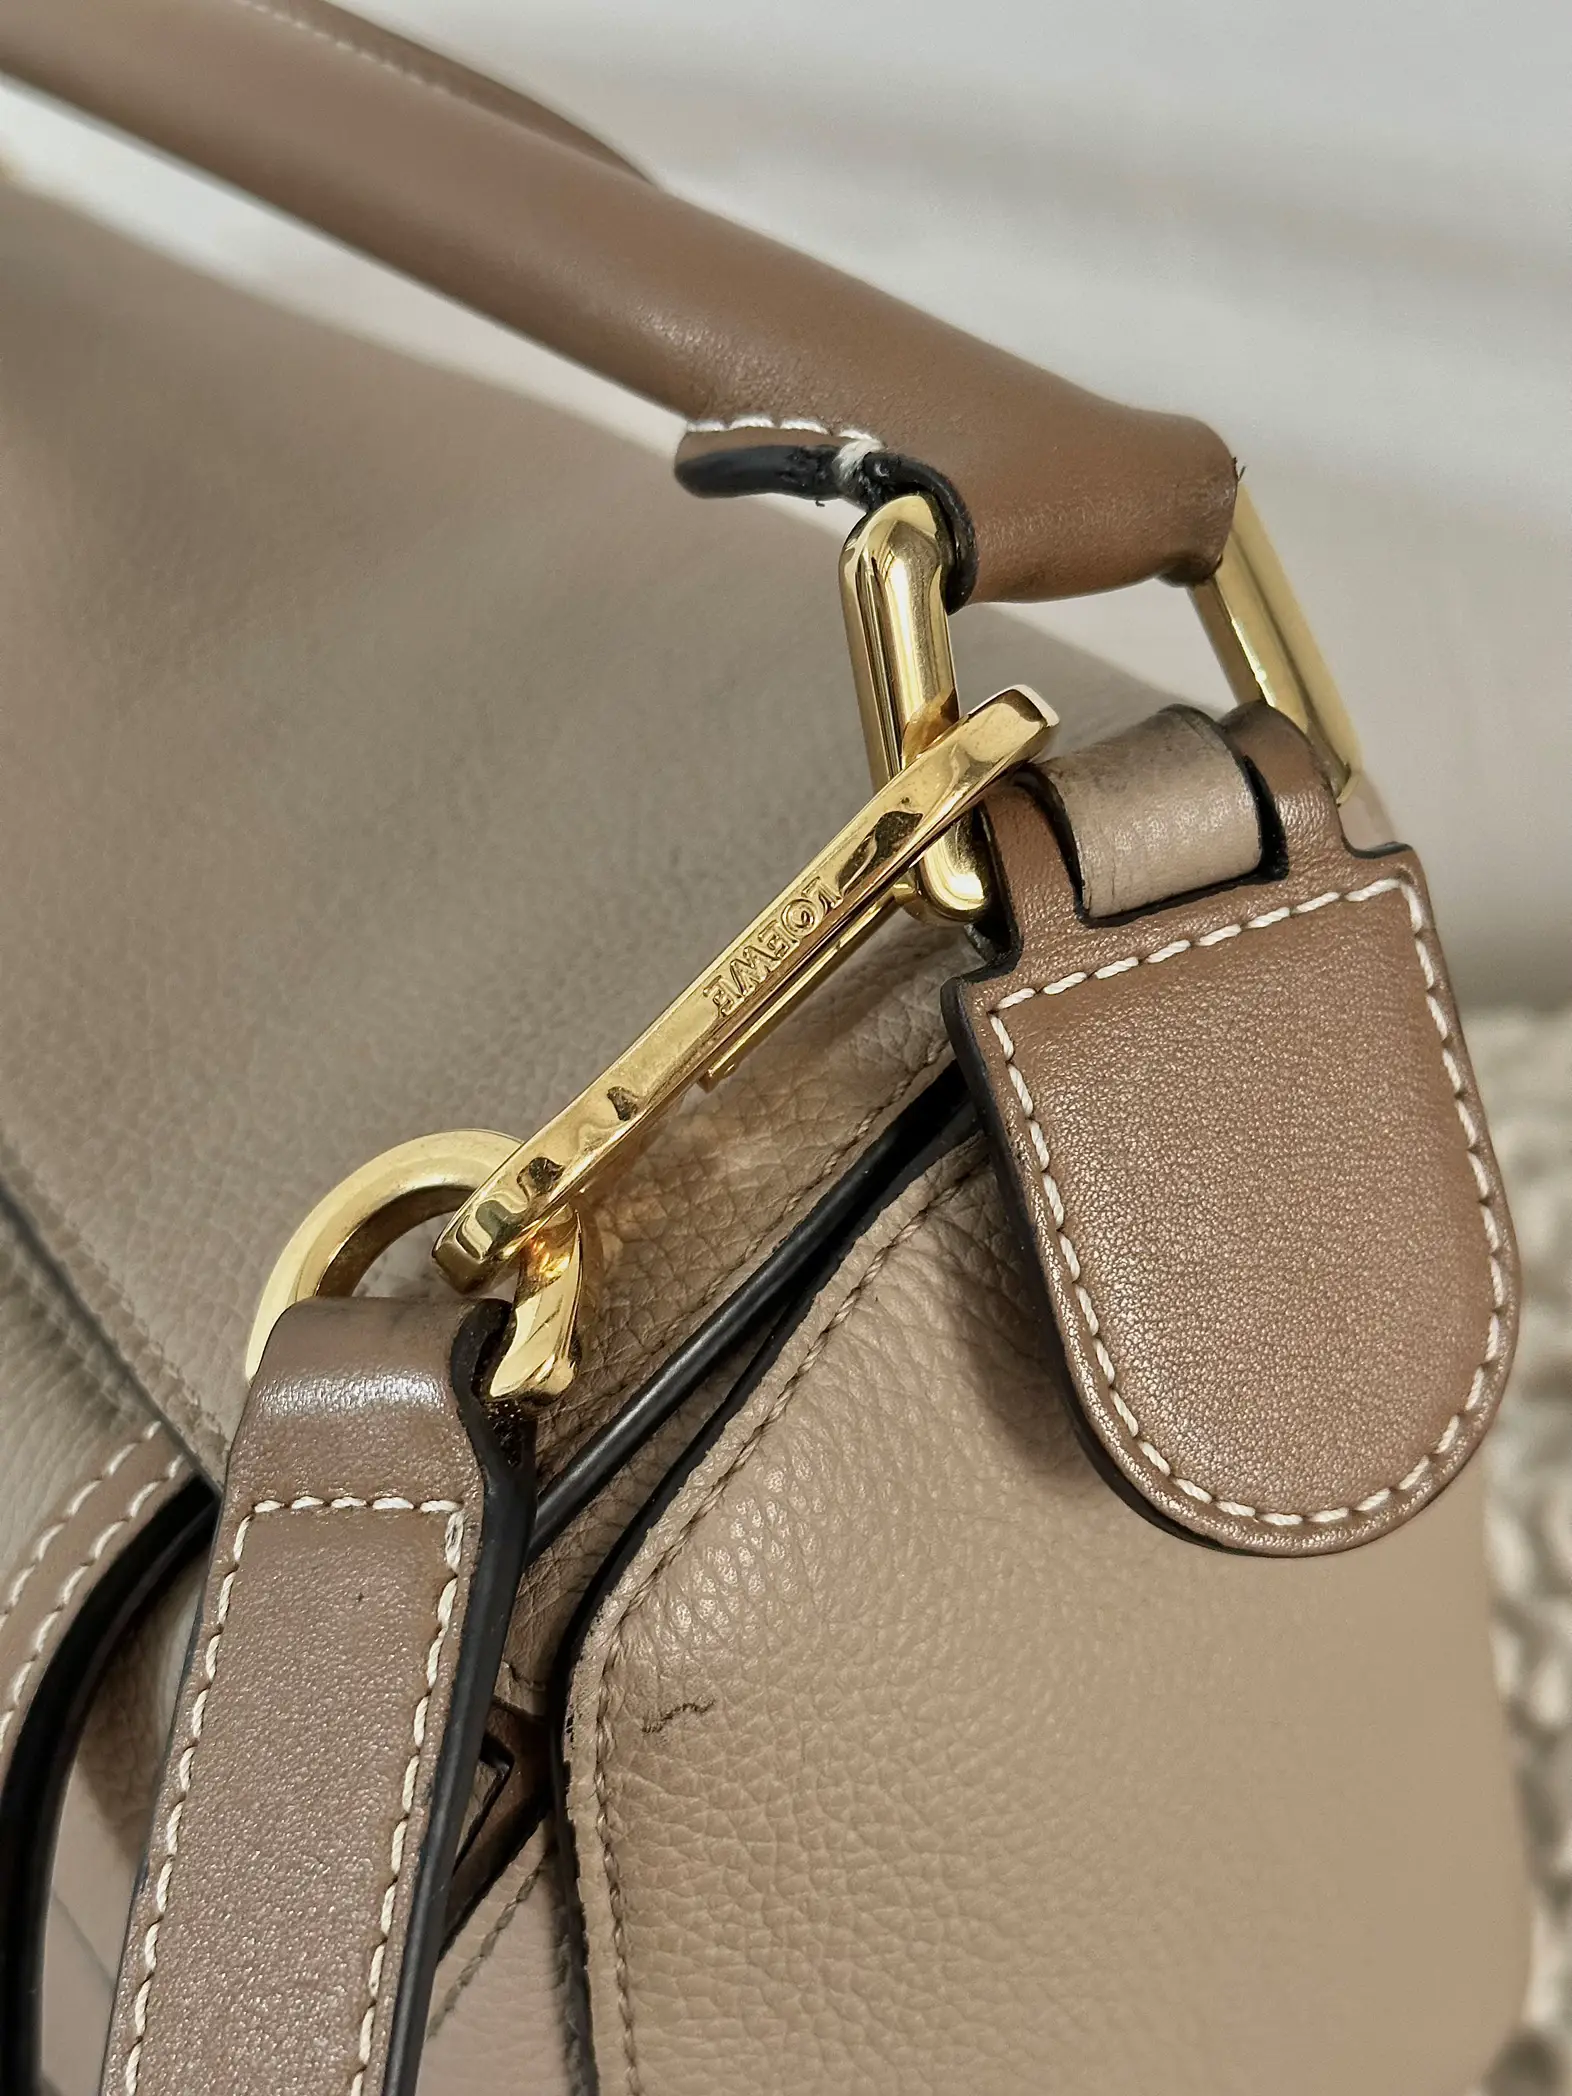 LOEWE SMALL PUZZLE BAG REVIEW, CLASSIC OR TREND?, TRY ON, PROS AND CONS